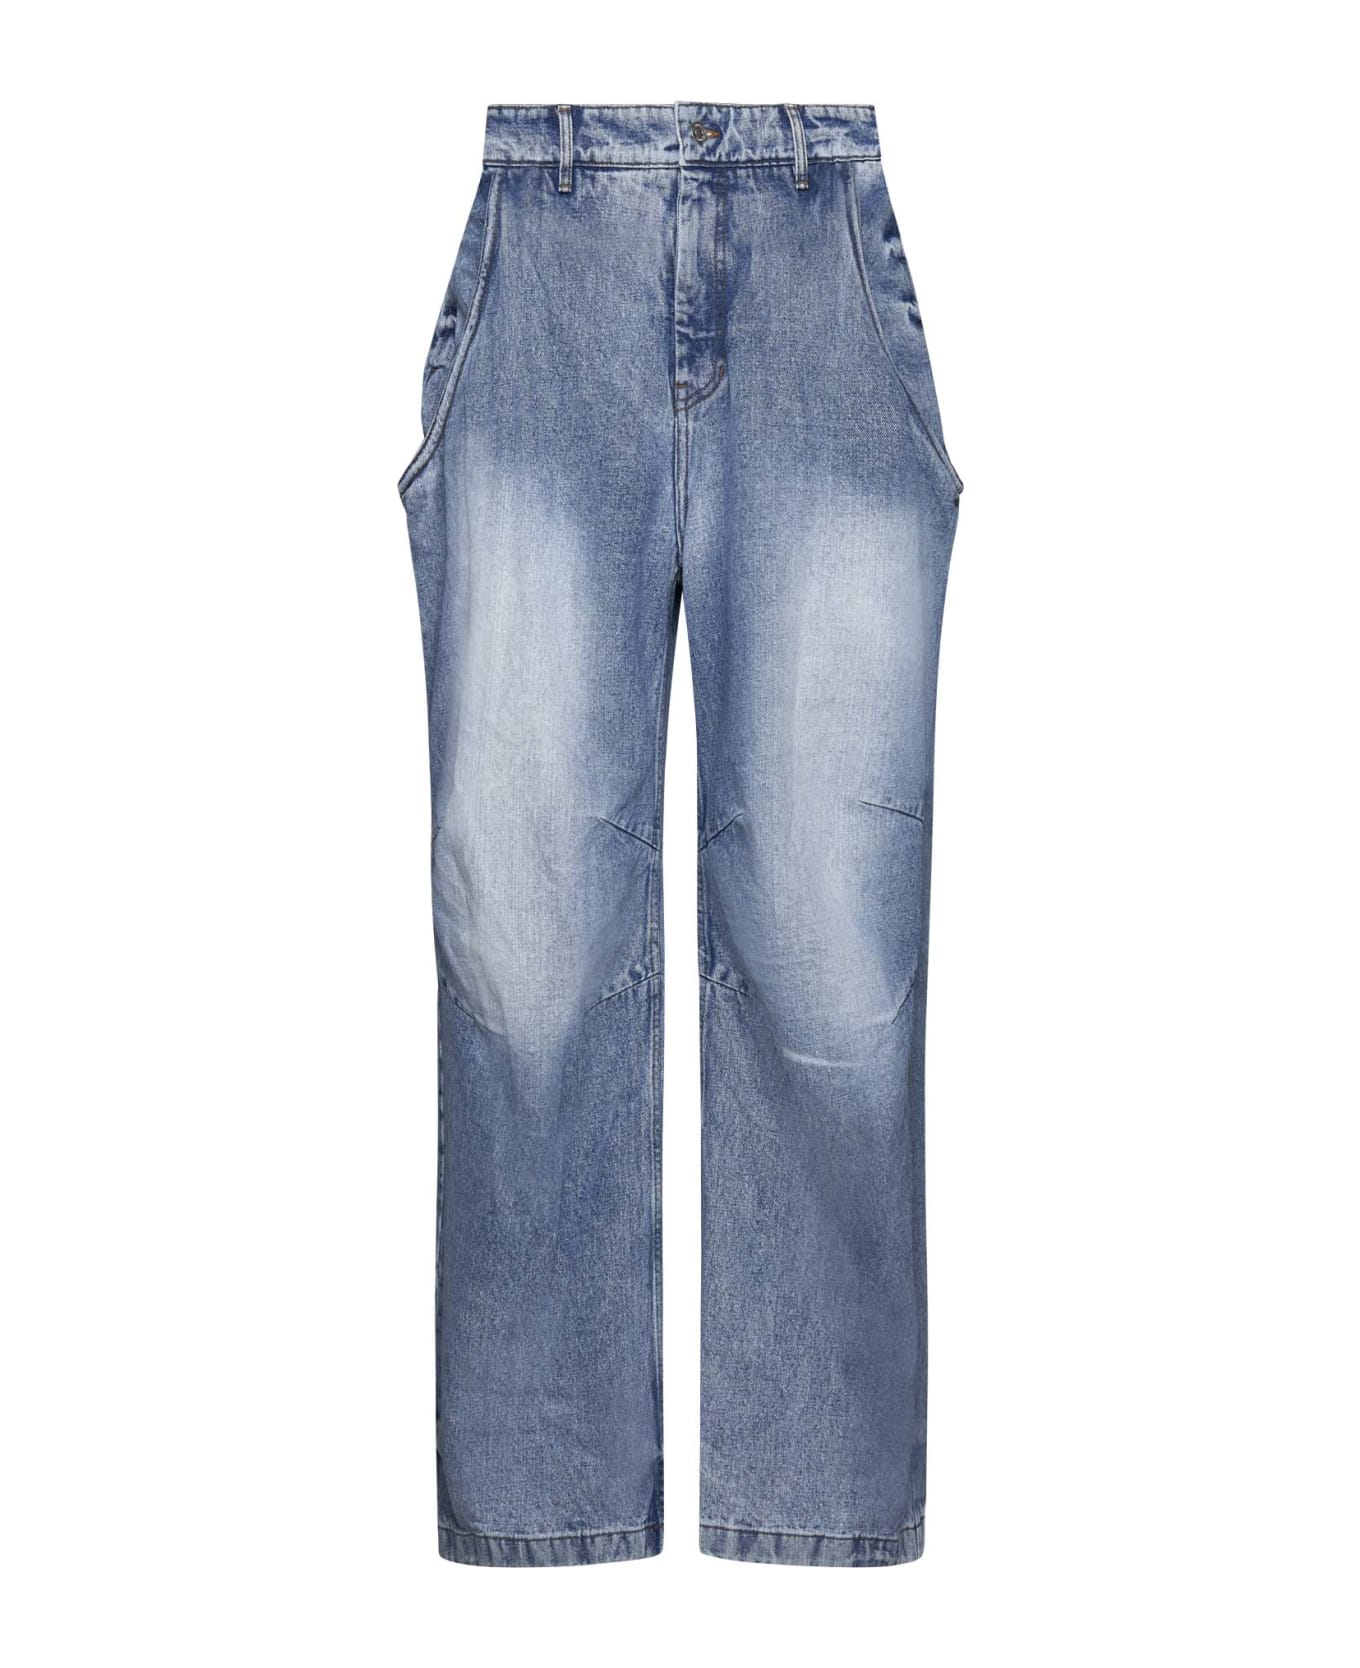 WE11 DONE Jeans - Blue